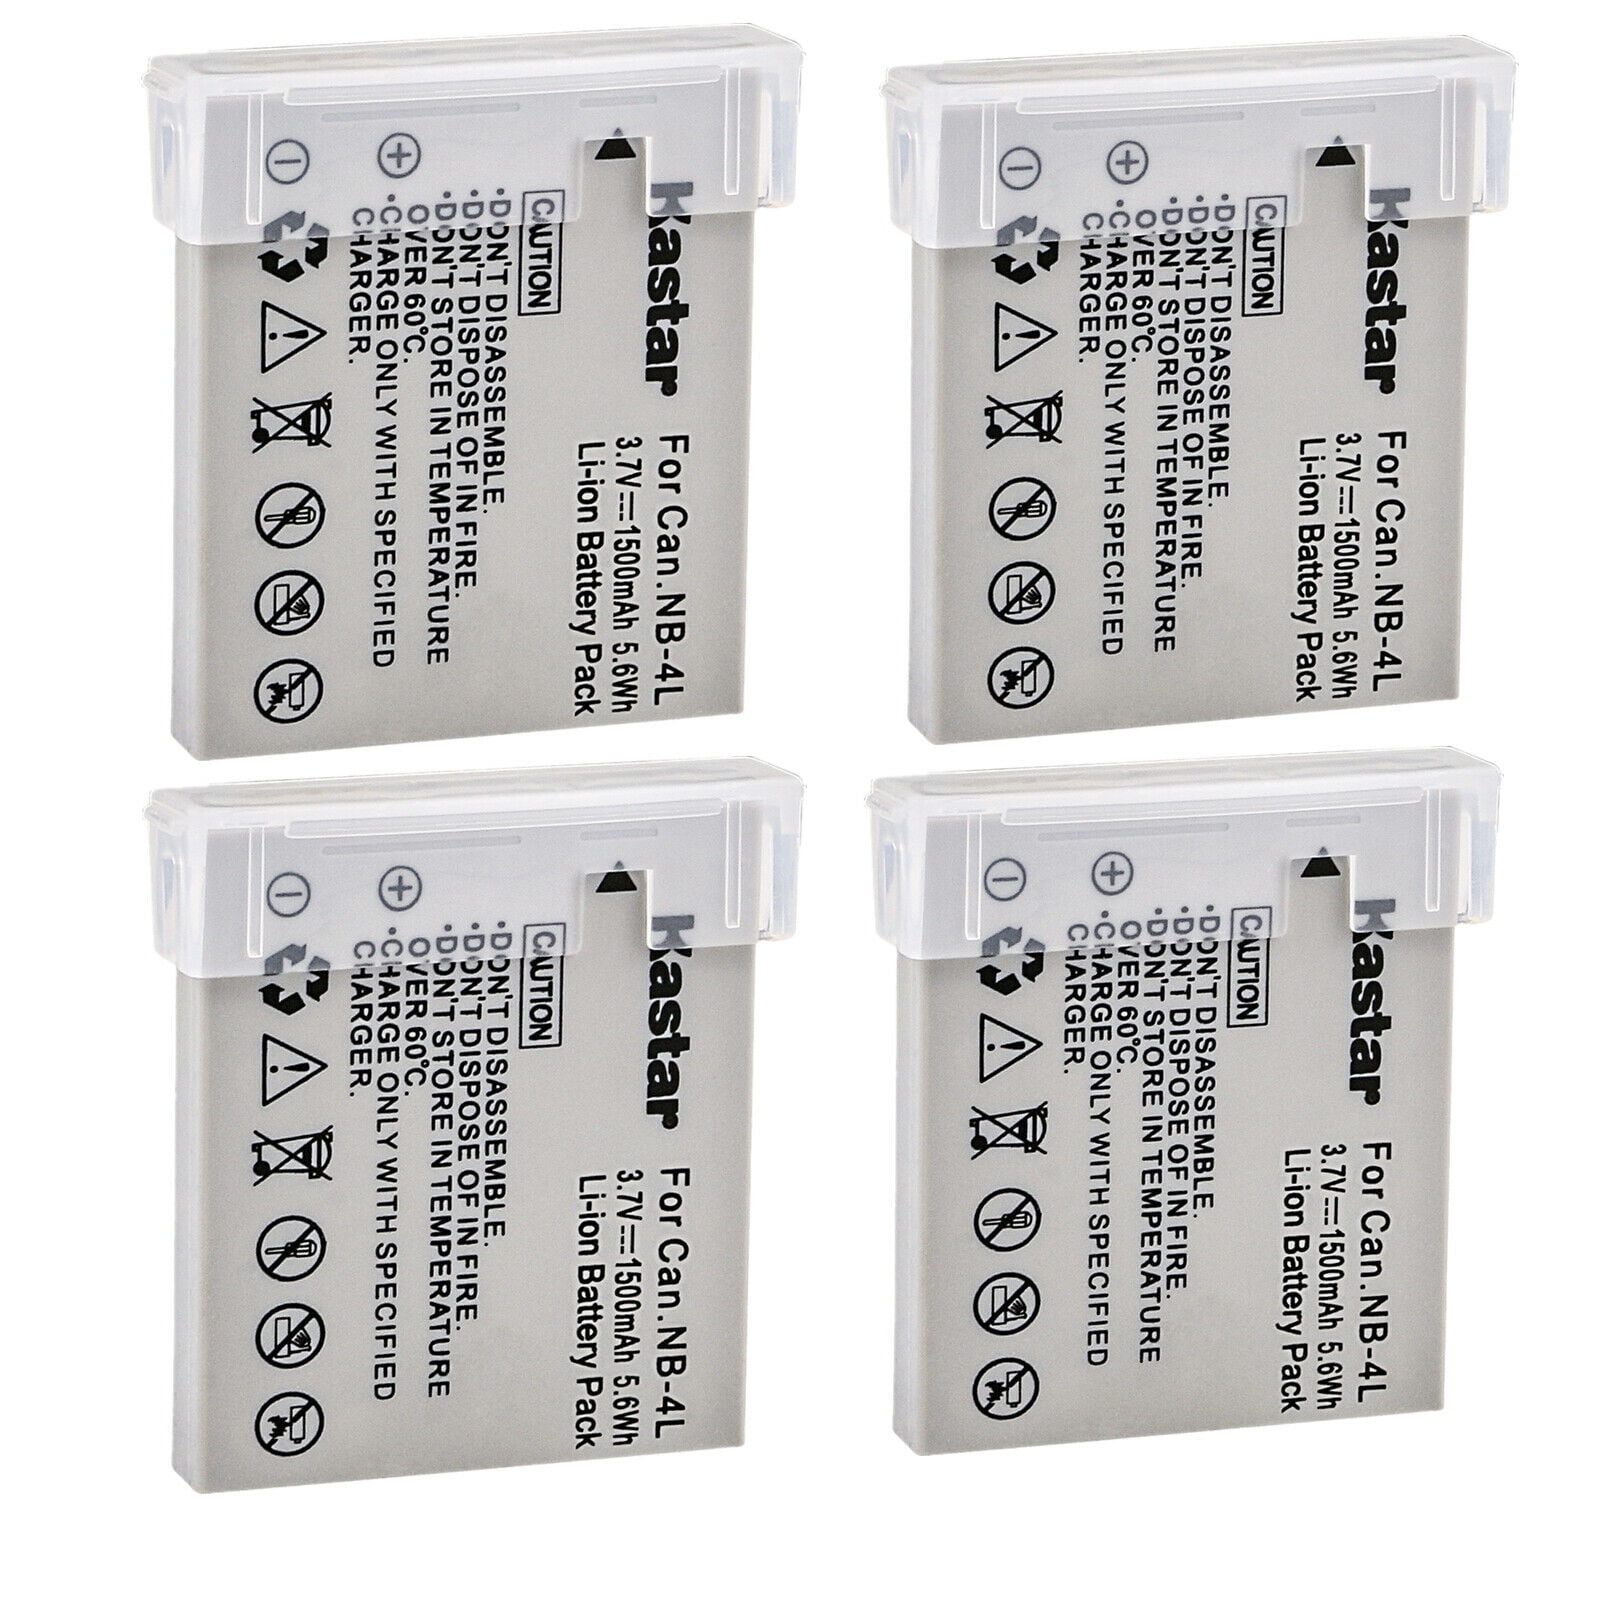 Kastar 4-Pack NB-4L Battery Replacement for Canon Digital IXUS 100 IS,  Digital IXUS 110 IS, Digital IXUS 120 IS, Digital IXUS 130, Digital 40,  Digital 50, PowerShot SD30, PowerShot SD40 Camera - Walmart.com